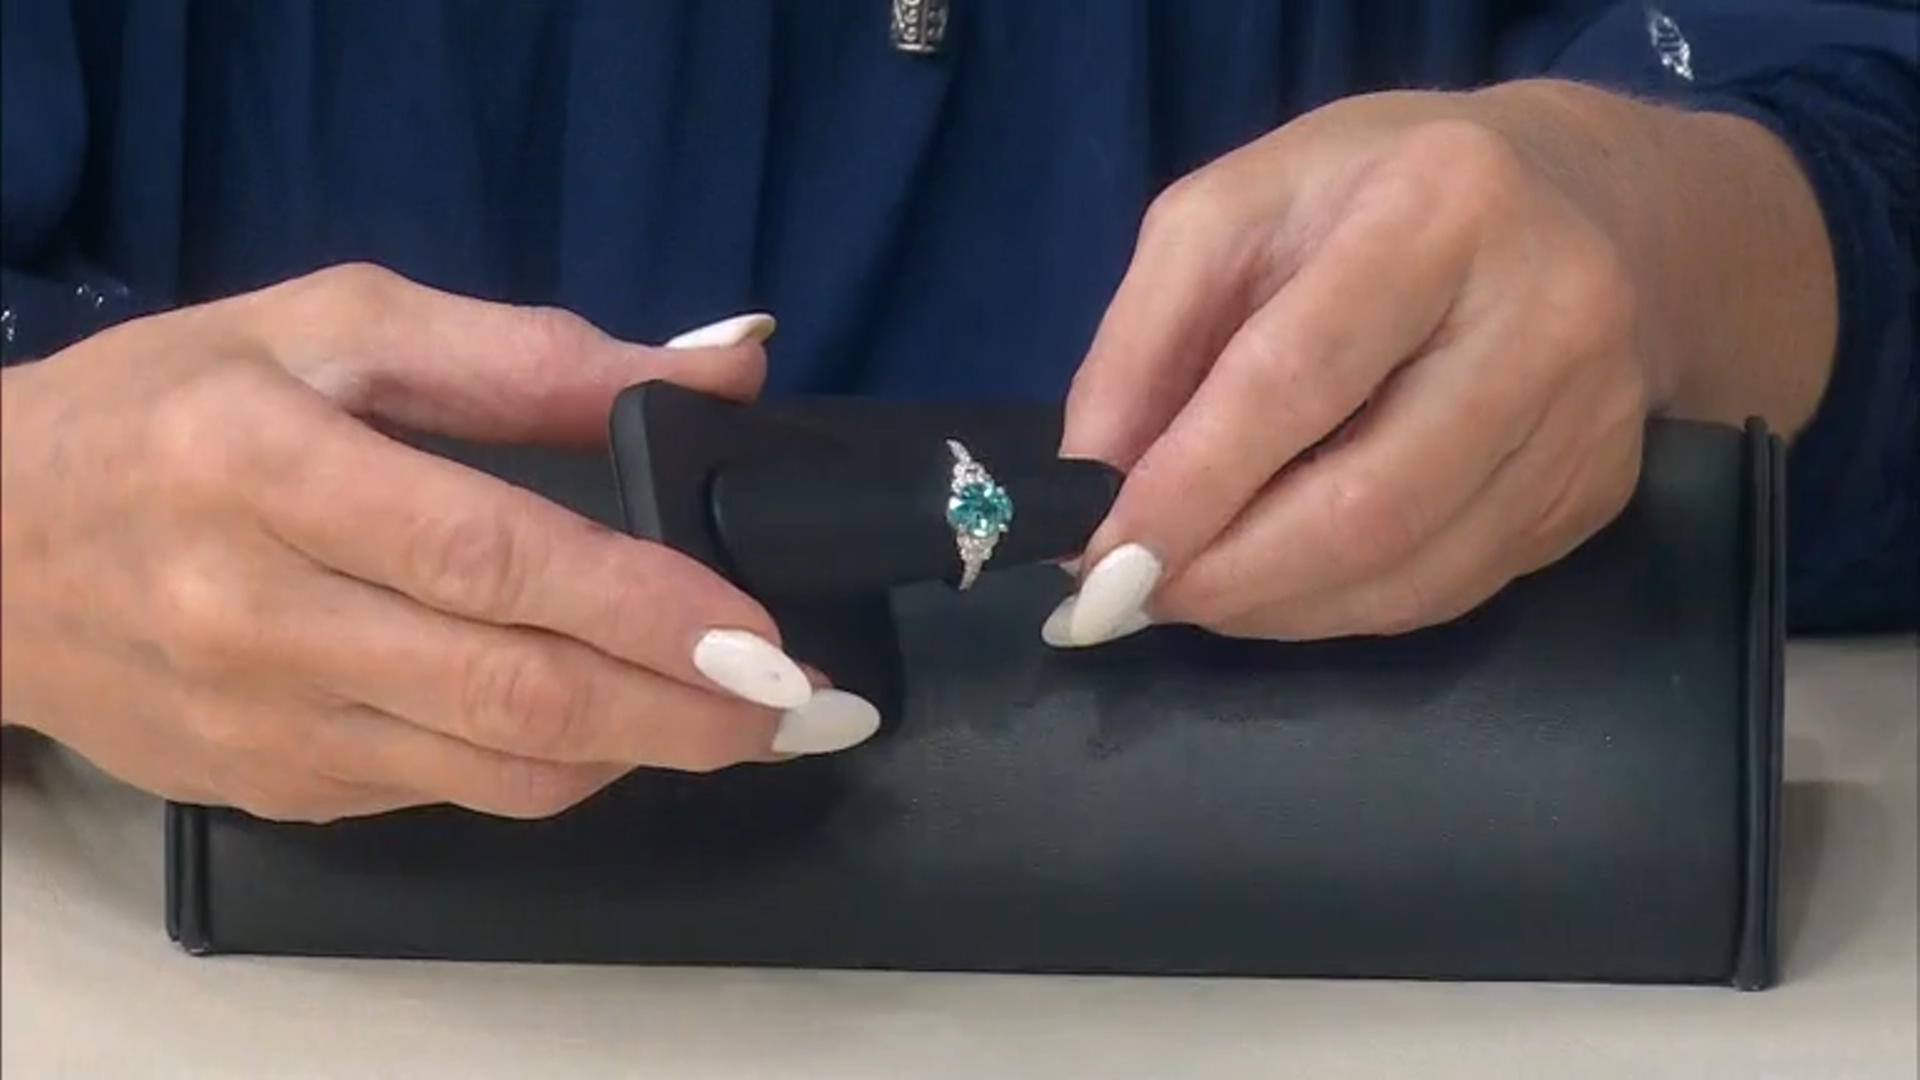 Blue Zircon Rhodium Over Sterling Silver Ring 2.52ctw Video Thumbnail